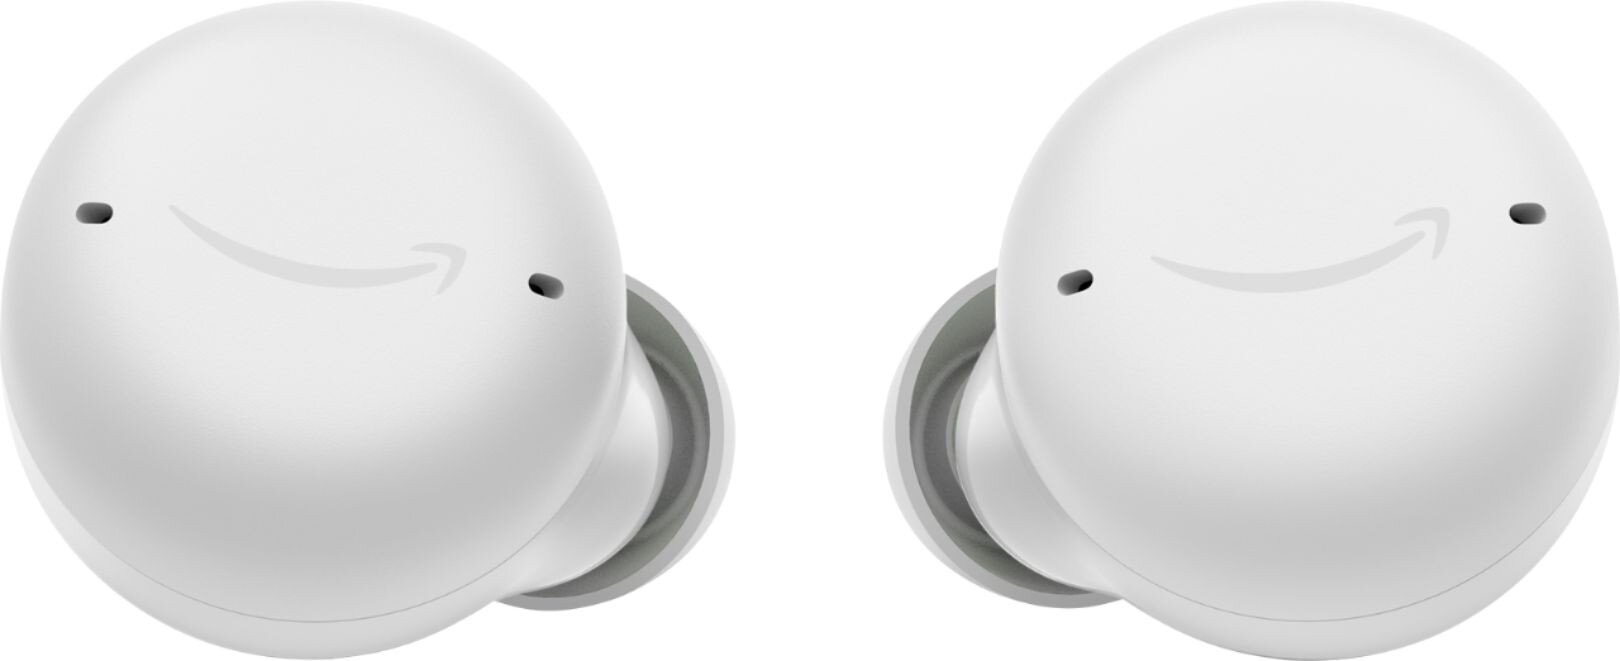 Echo Buds 2nd Gen Wireless earbuds with Alexa , active noise  cancellation